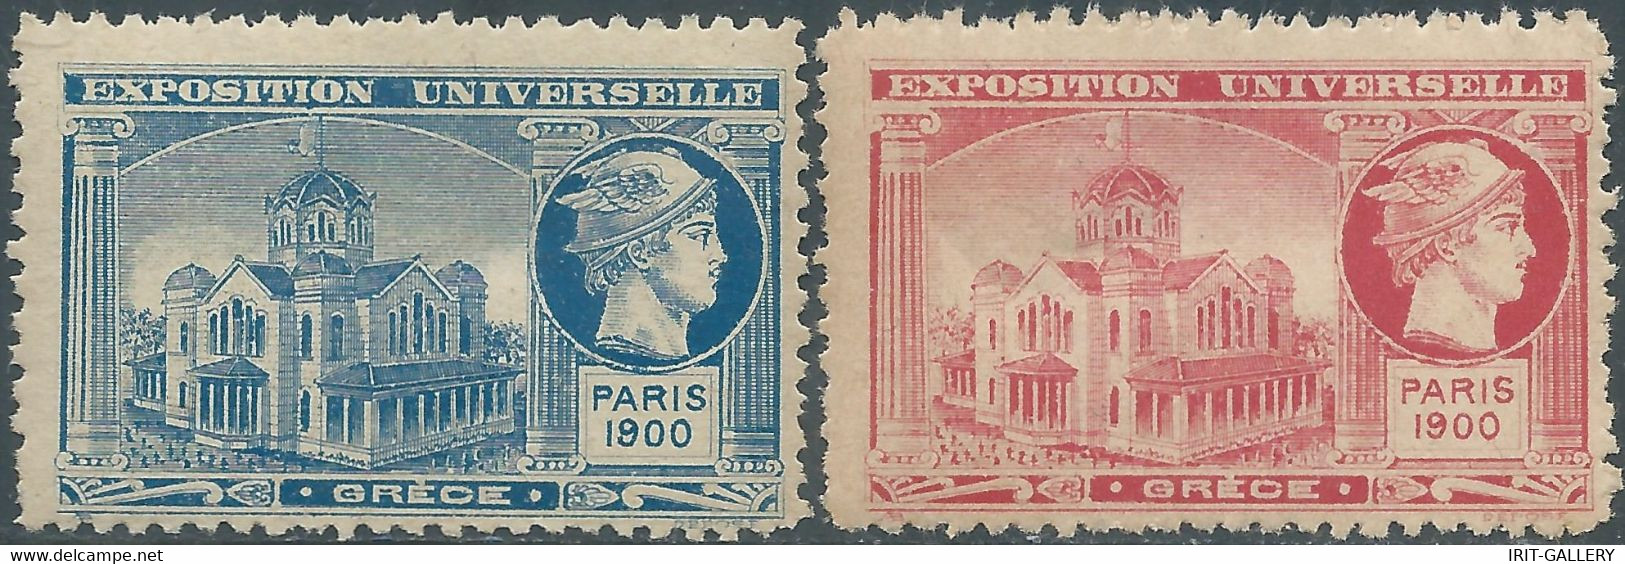 France,Paris 1900 UNIVERSAL EXHIBITION OF Greece ,Trace Of Hinged - 1900 – Paris (France)